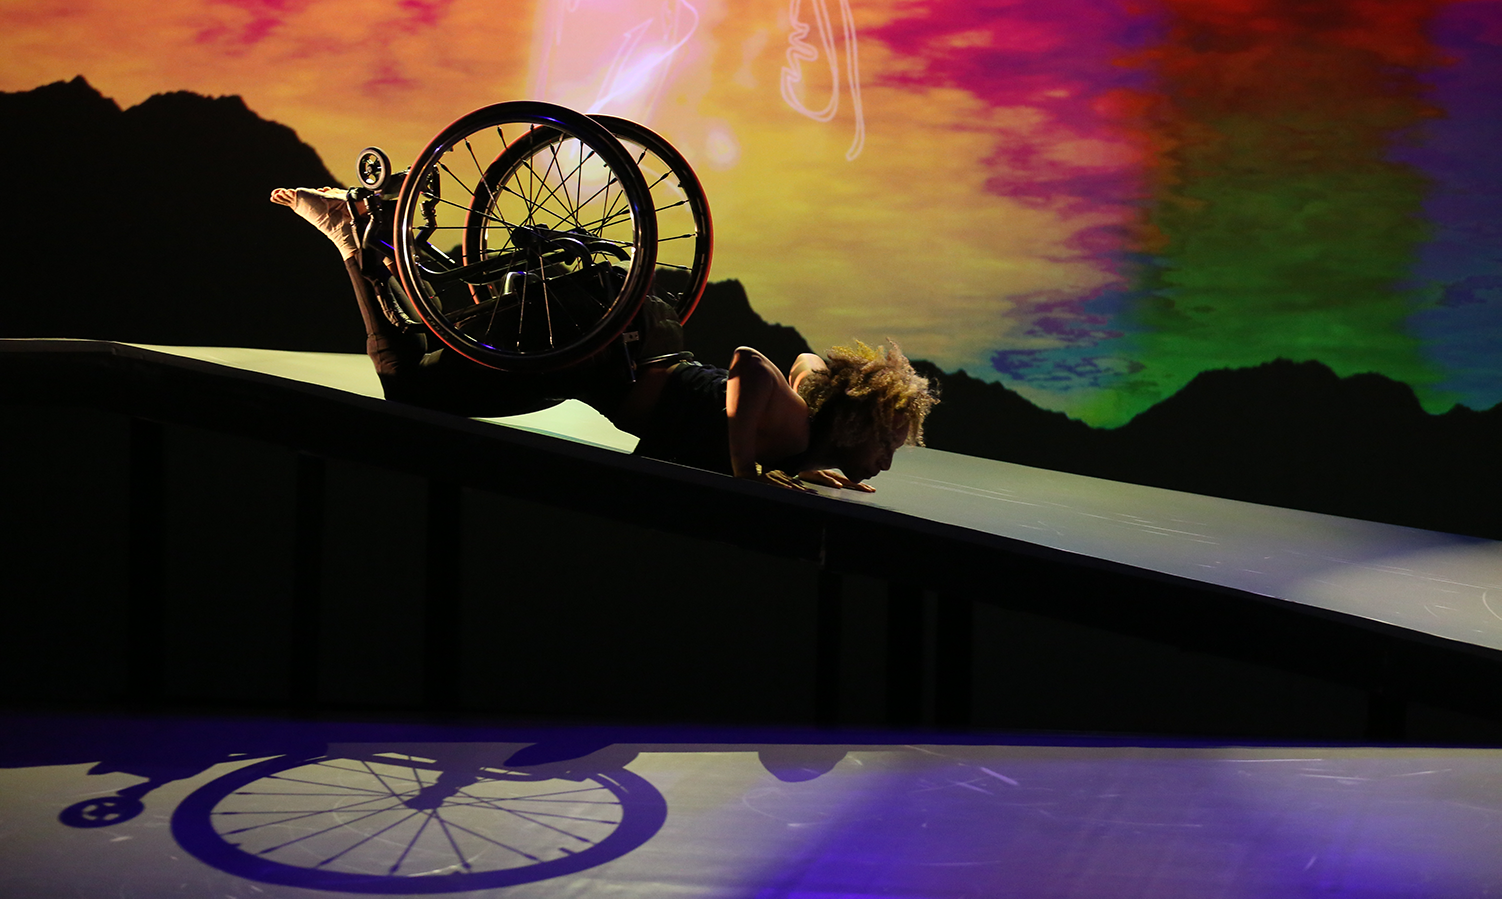 As the sky transitions from gold to amber to red, green and blue, Alice Sheppard, a light-skinned multiracial Black woman, slides in a spider position on her stomach down the shiny ramp. Her bent elbows, her wheelchair and the bottoms of her bare feet point upward as she stares down the Ramp. The shadow of her wheelchair is visible beneath her short curly hair glows in the light.